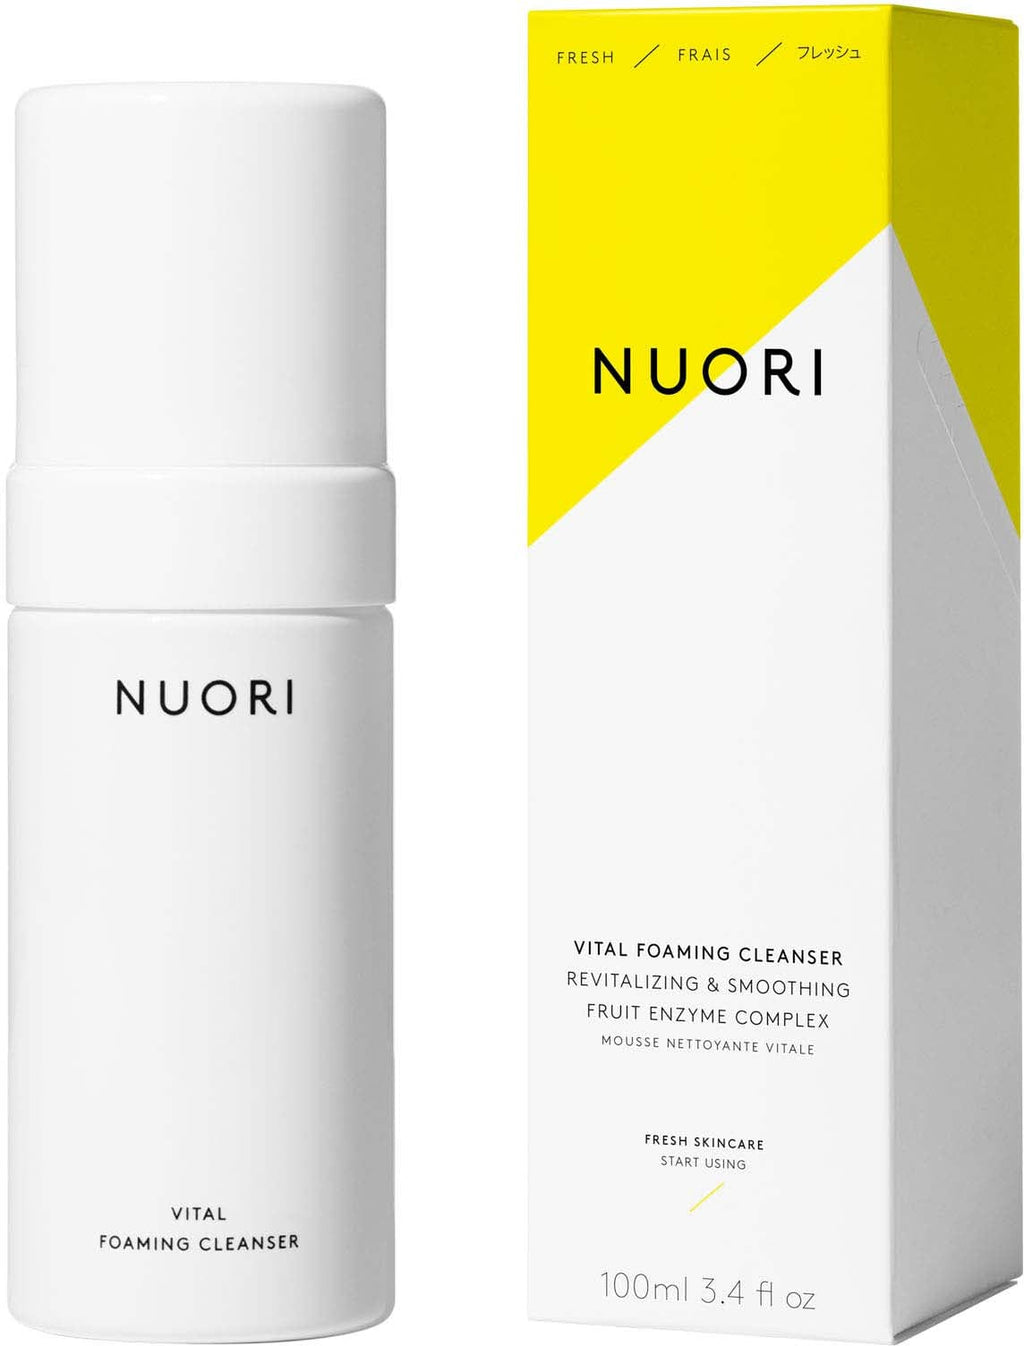 NUORI - VITAL FOAMING CLEANSER - The Natural Beauty Club